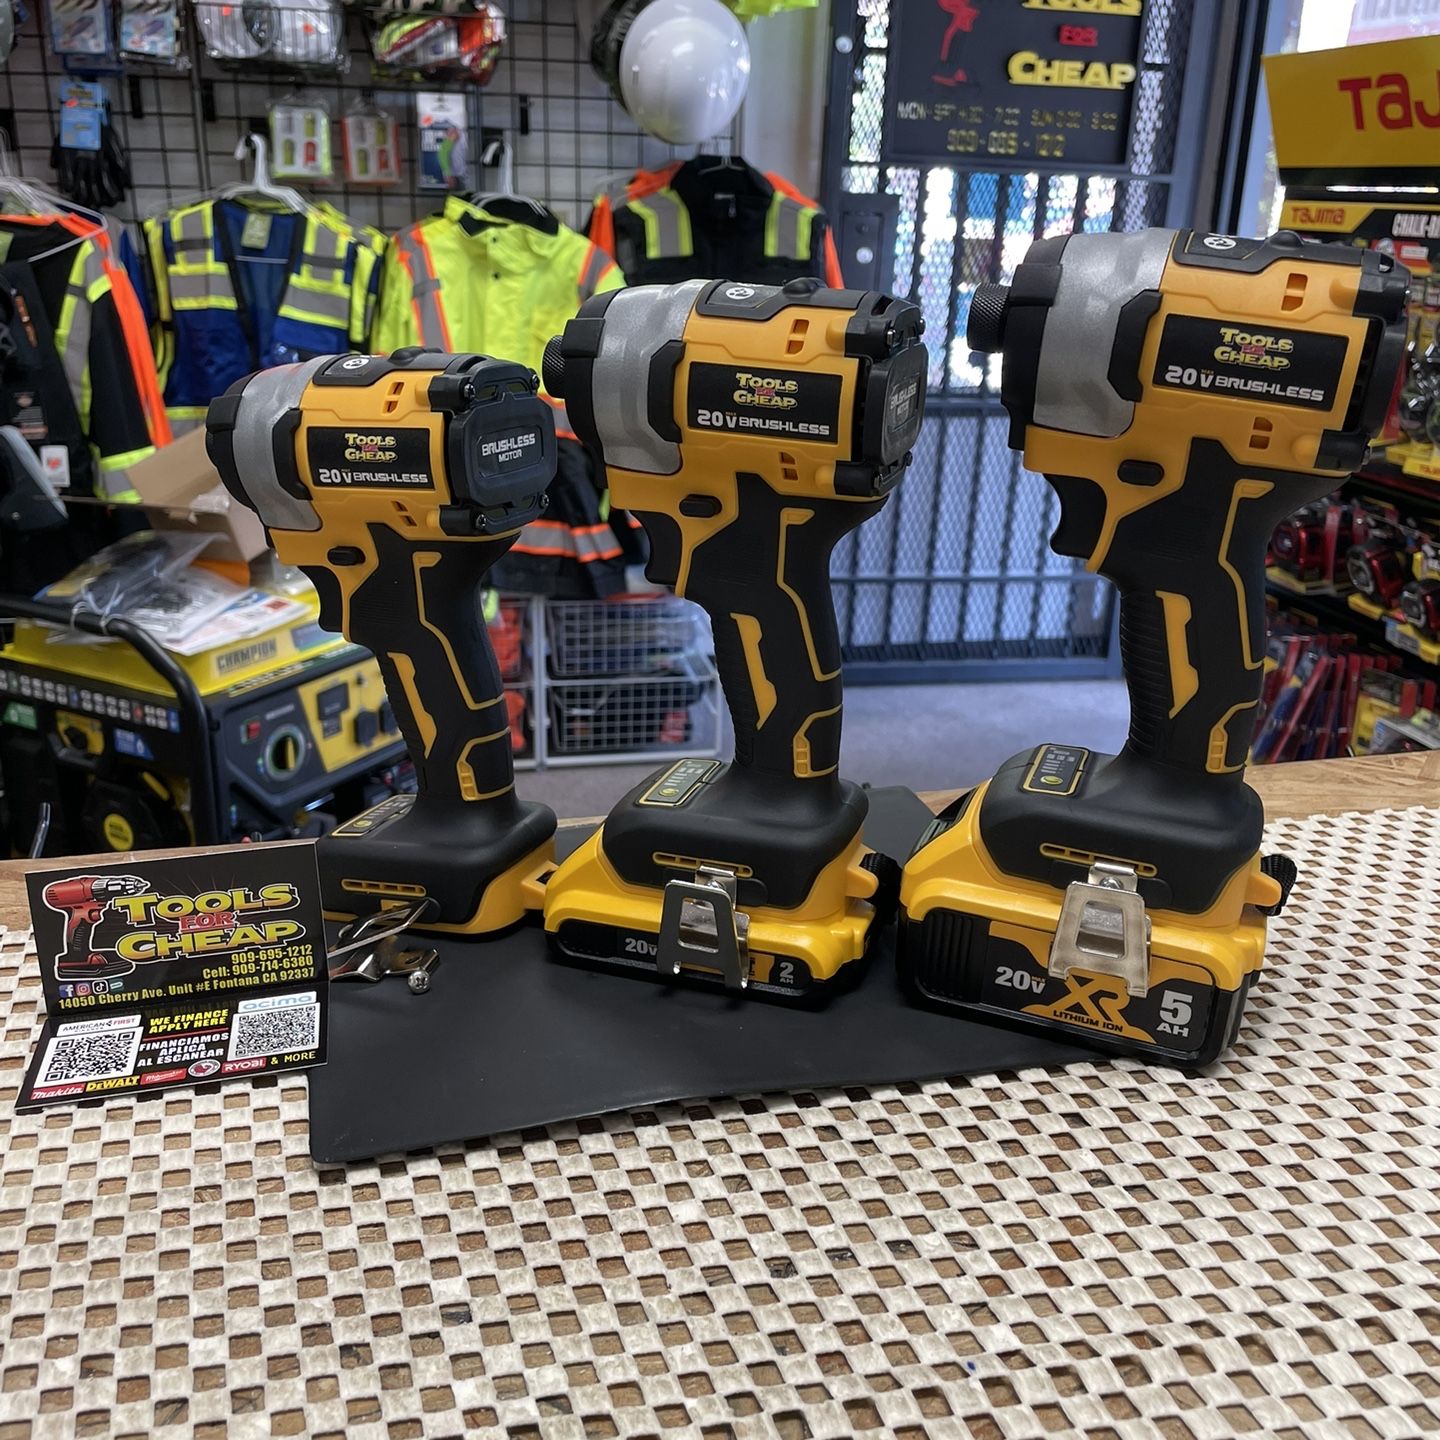 TFC Cordless Brushless Impact Driver 3 Speed (Tool Only)(compatible w/ DEWALT 20v Batteries $69 EACH